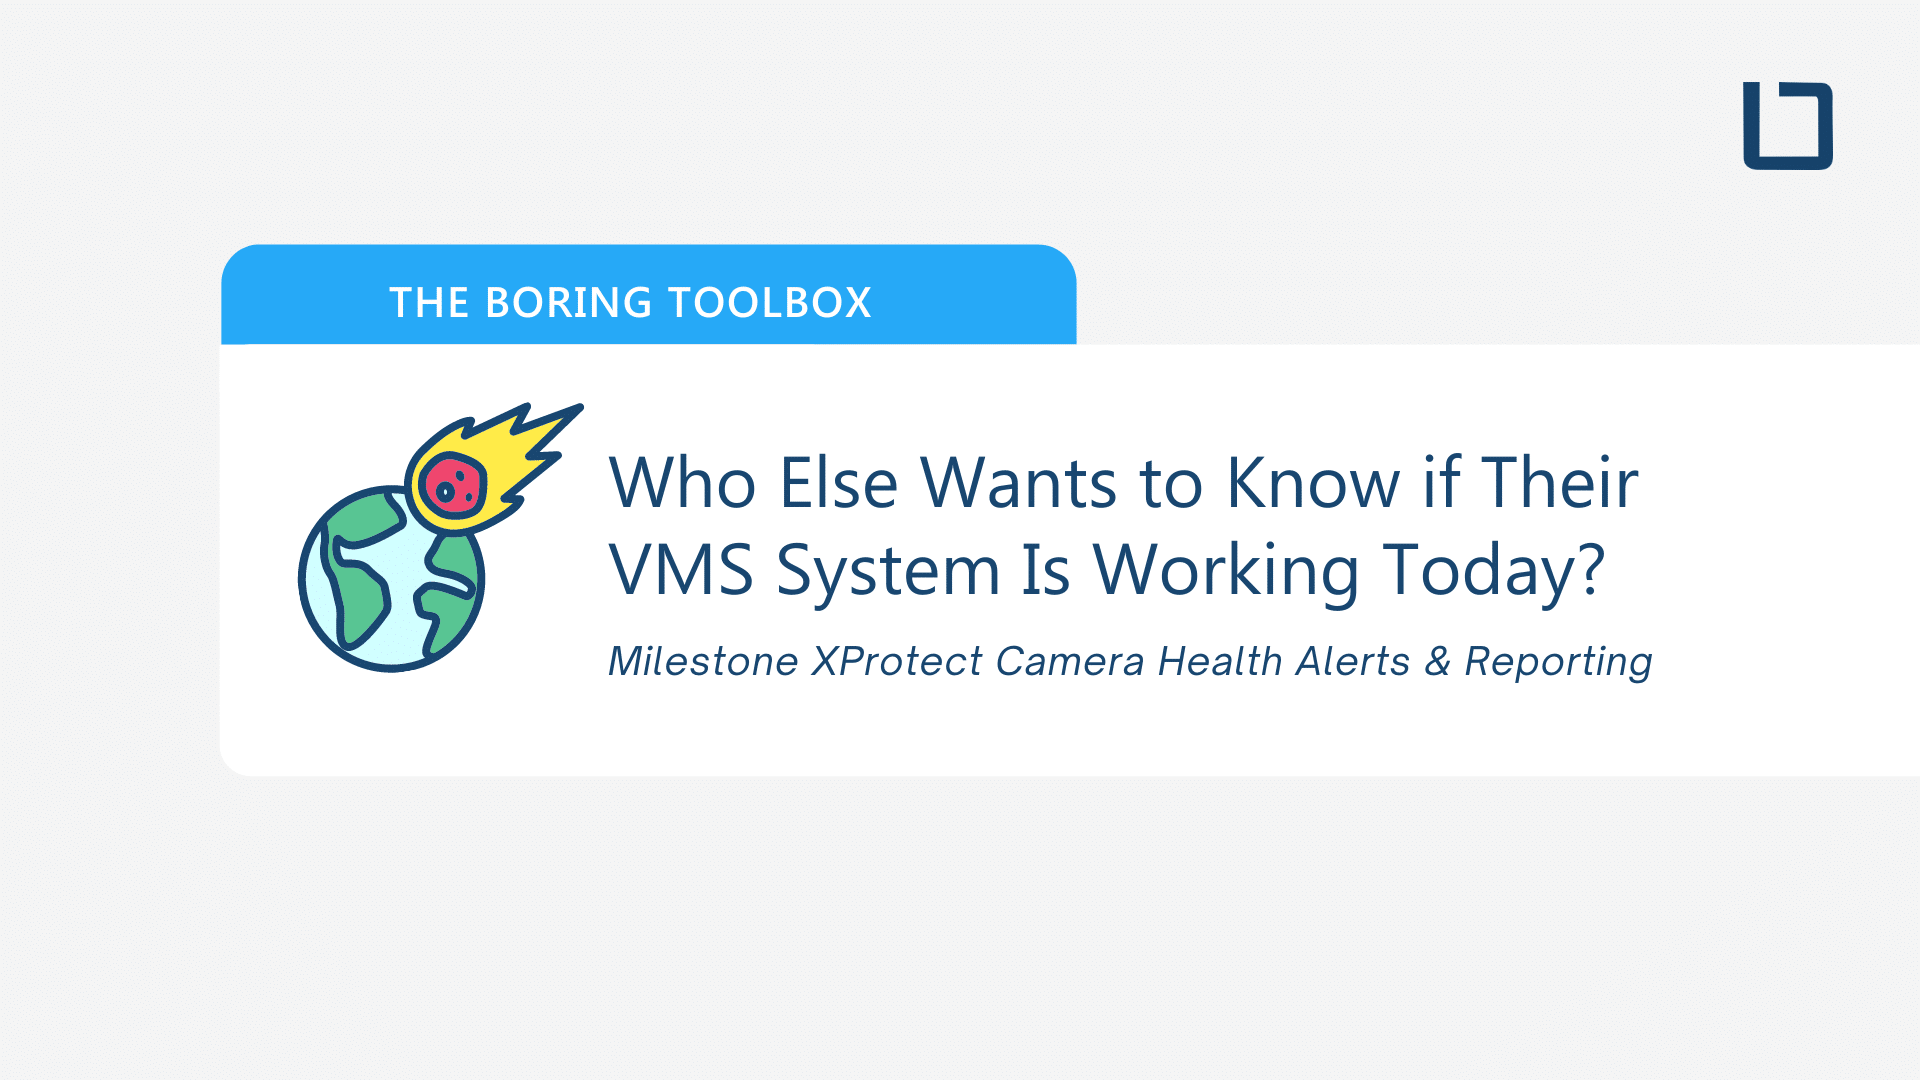 Who else wants to know if their VMS system is working today?